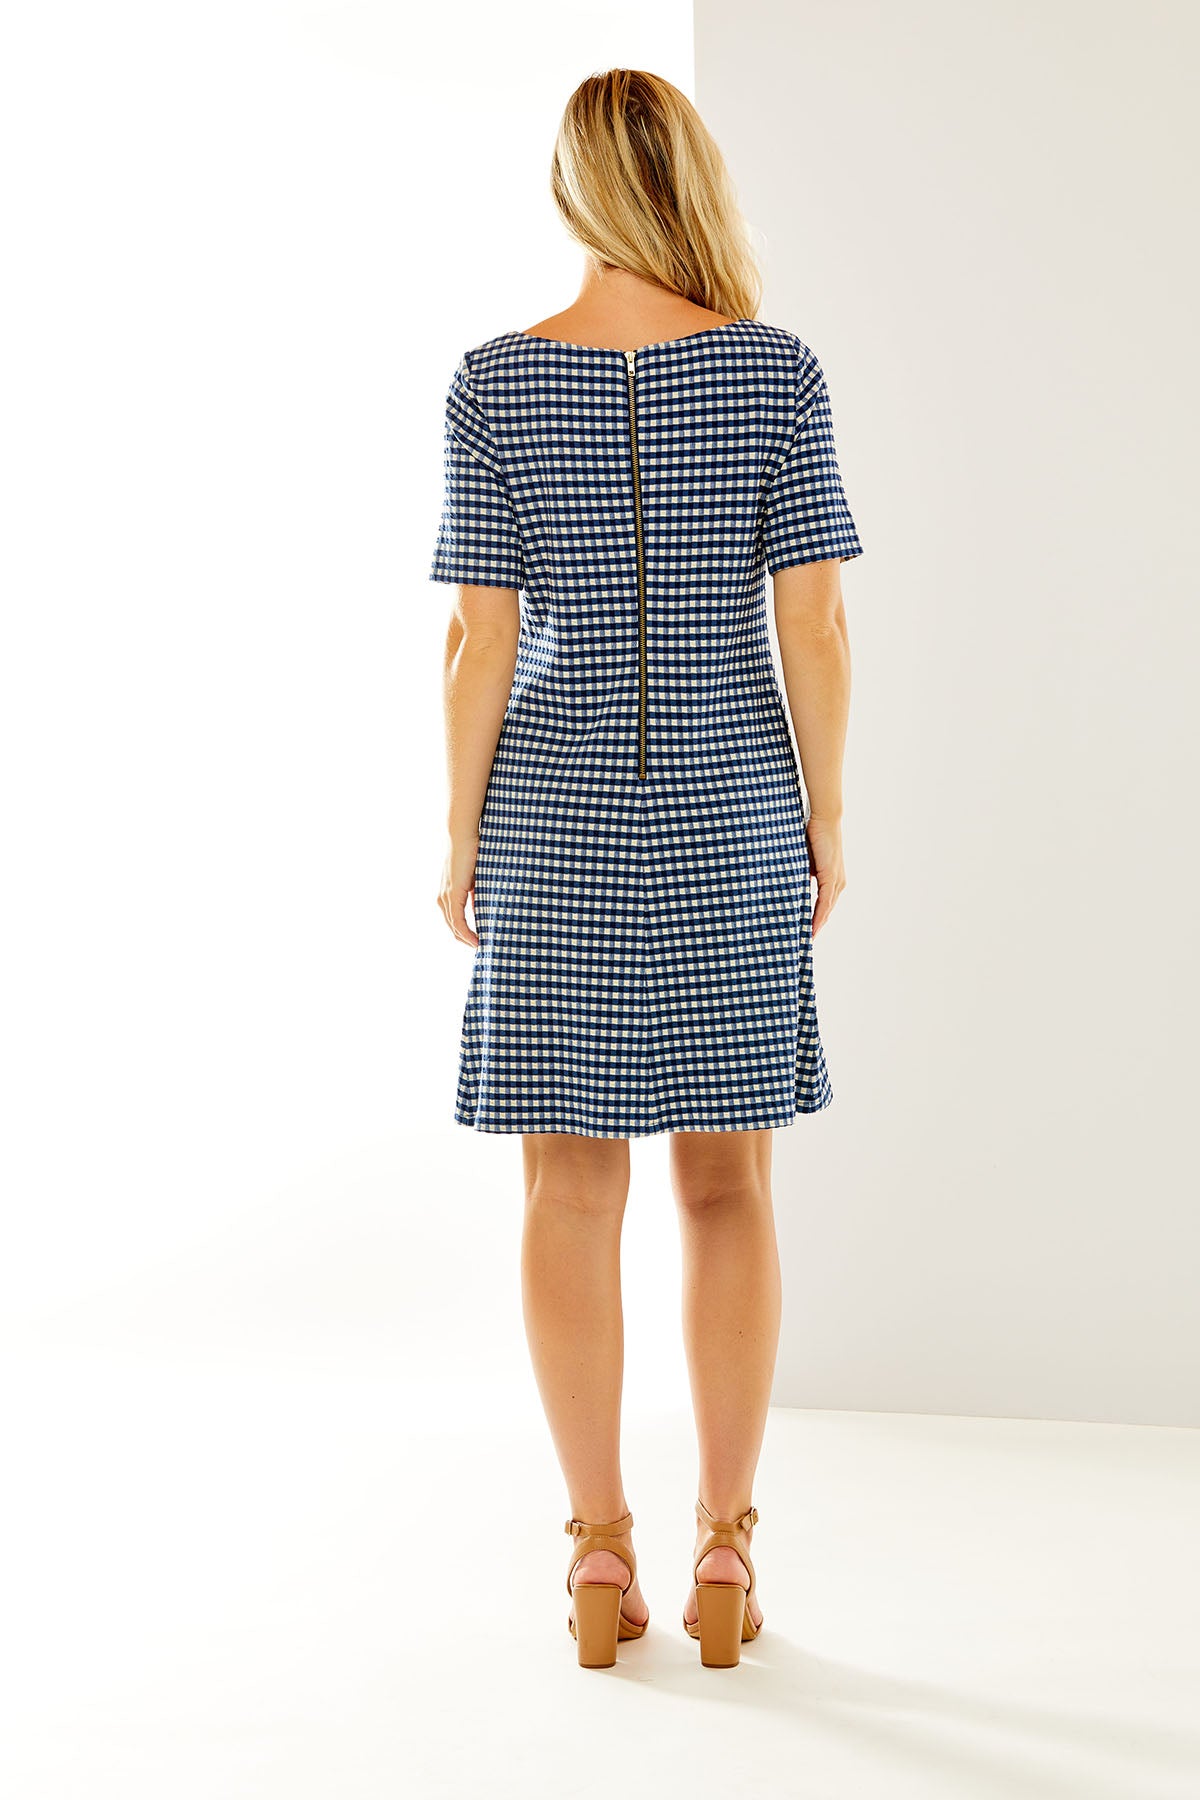 Woman in gingham dress